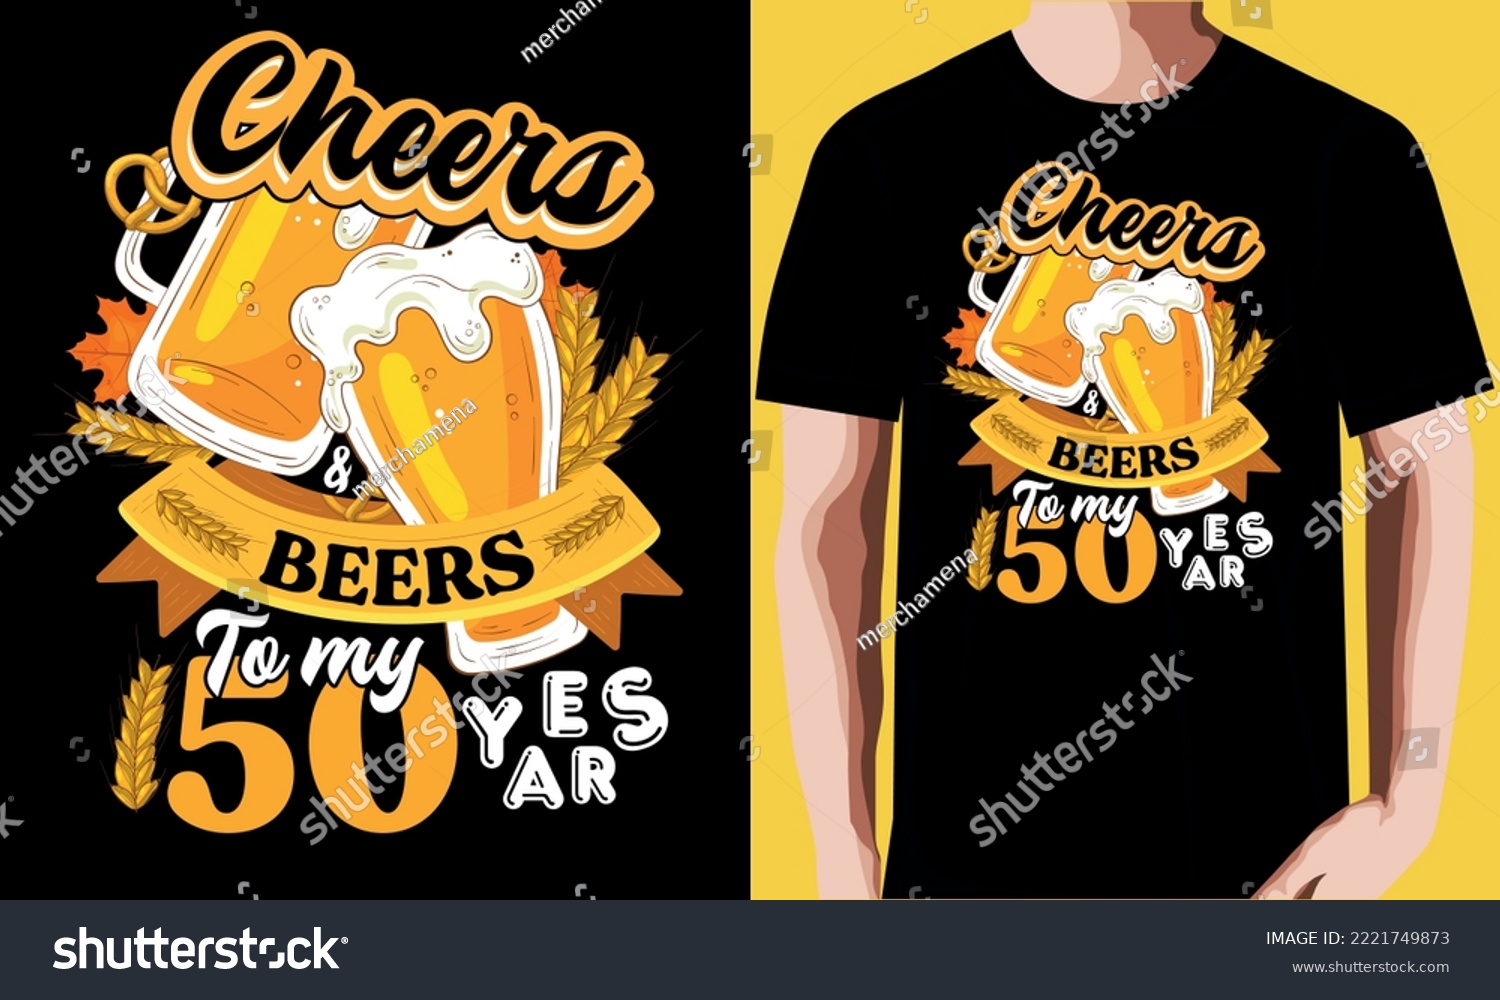 SVG of Cheers  beers to my 50 years t-shirt design. svg